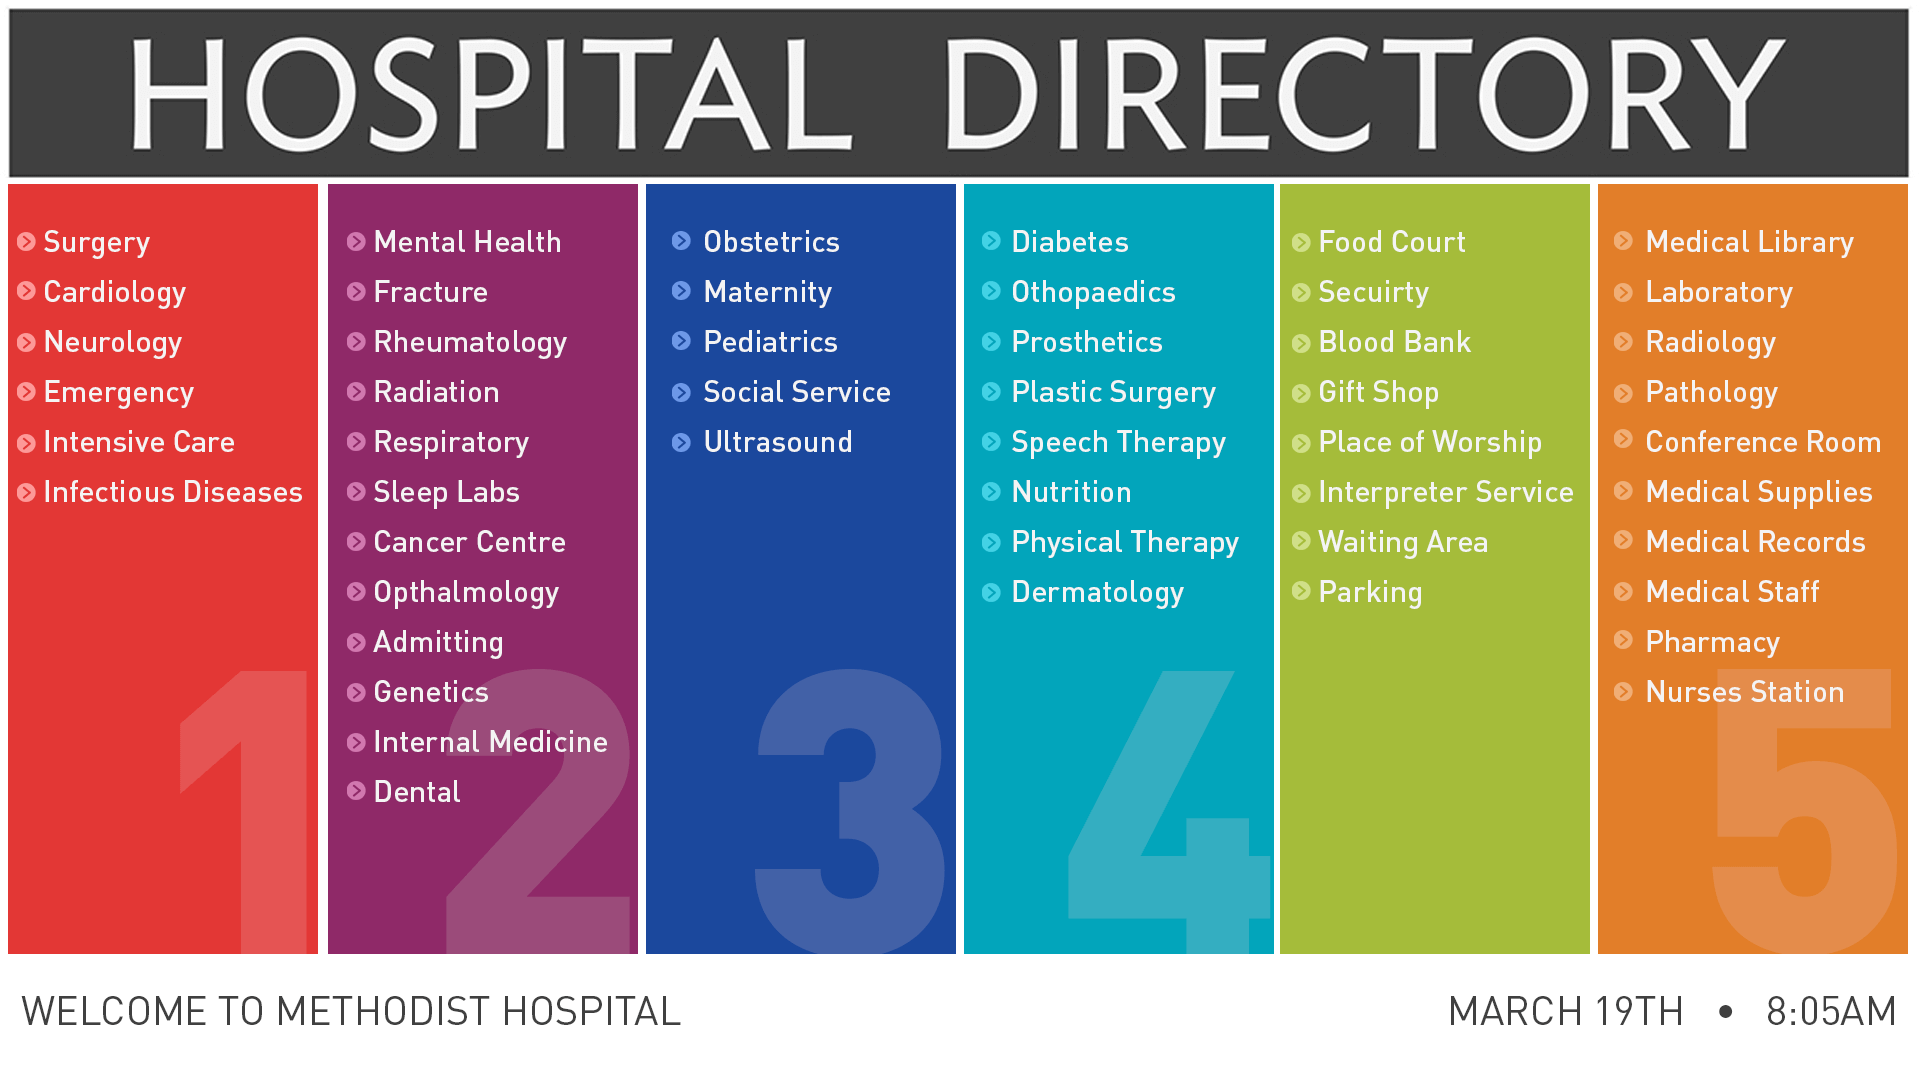 Colorful hospital directory for Methodist Hospital